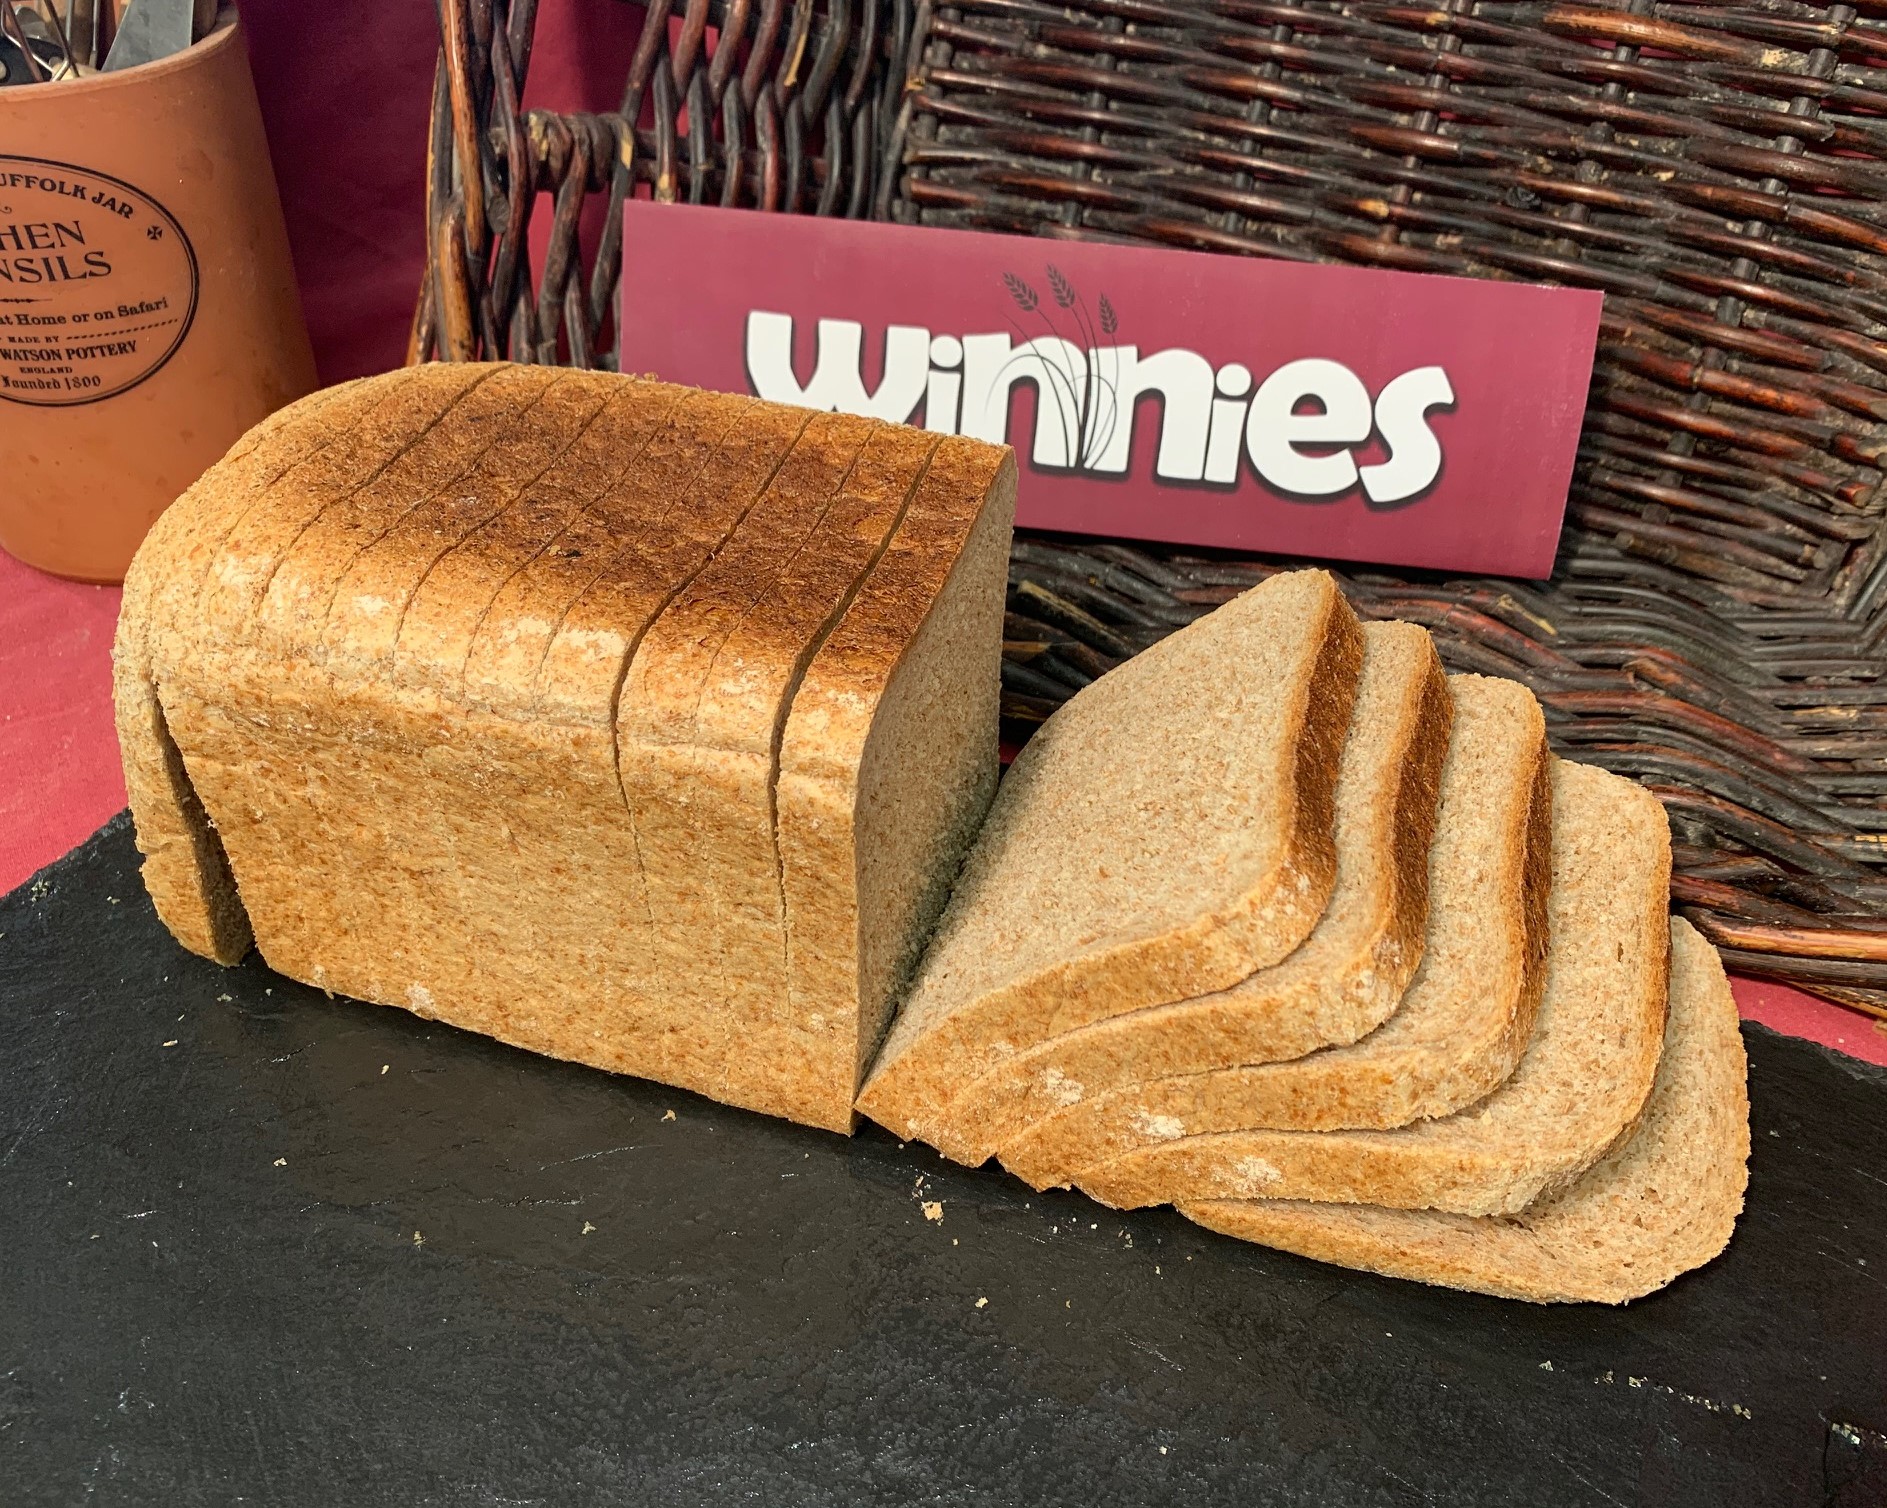 LARGE WHOLEMEAL SANDWICH SLICED